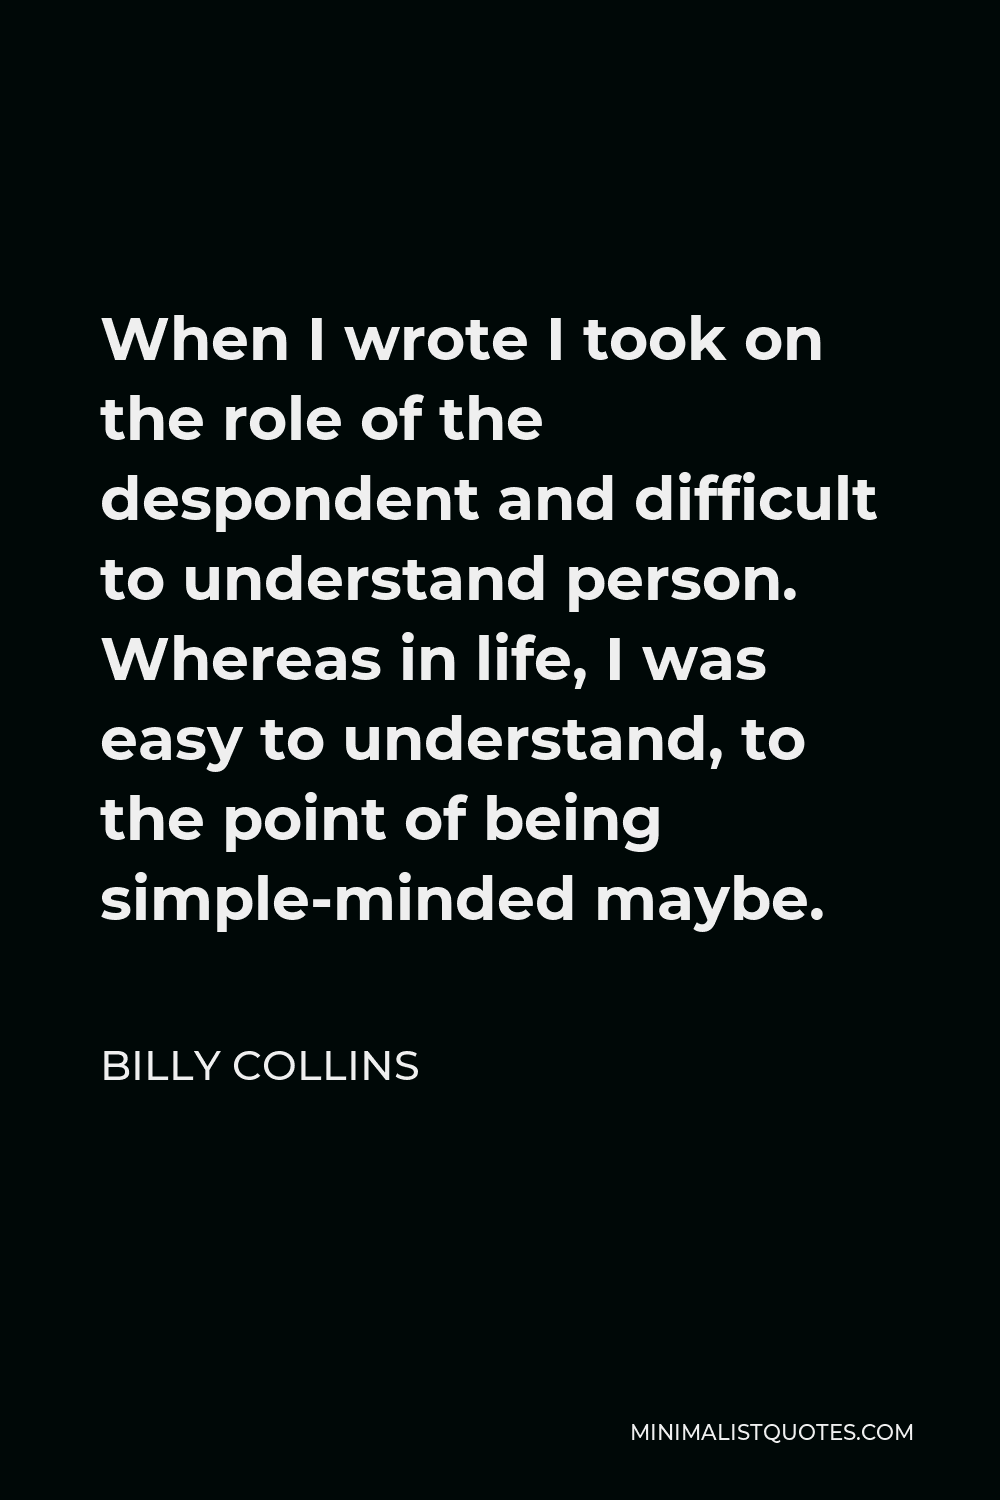 Billy Collins Quote - When I wrote I took on the role of the despondent and difficult to understand person. Whereas in life, I was easy to understand, to the point of being simple-minded maybe.